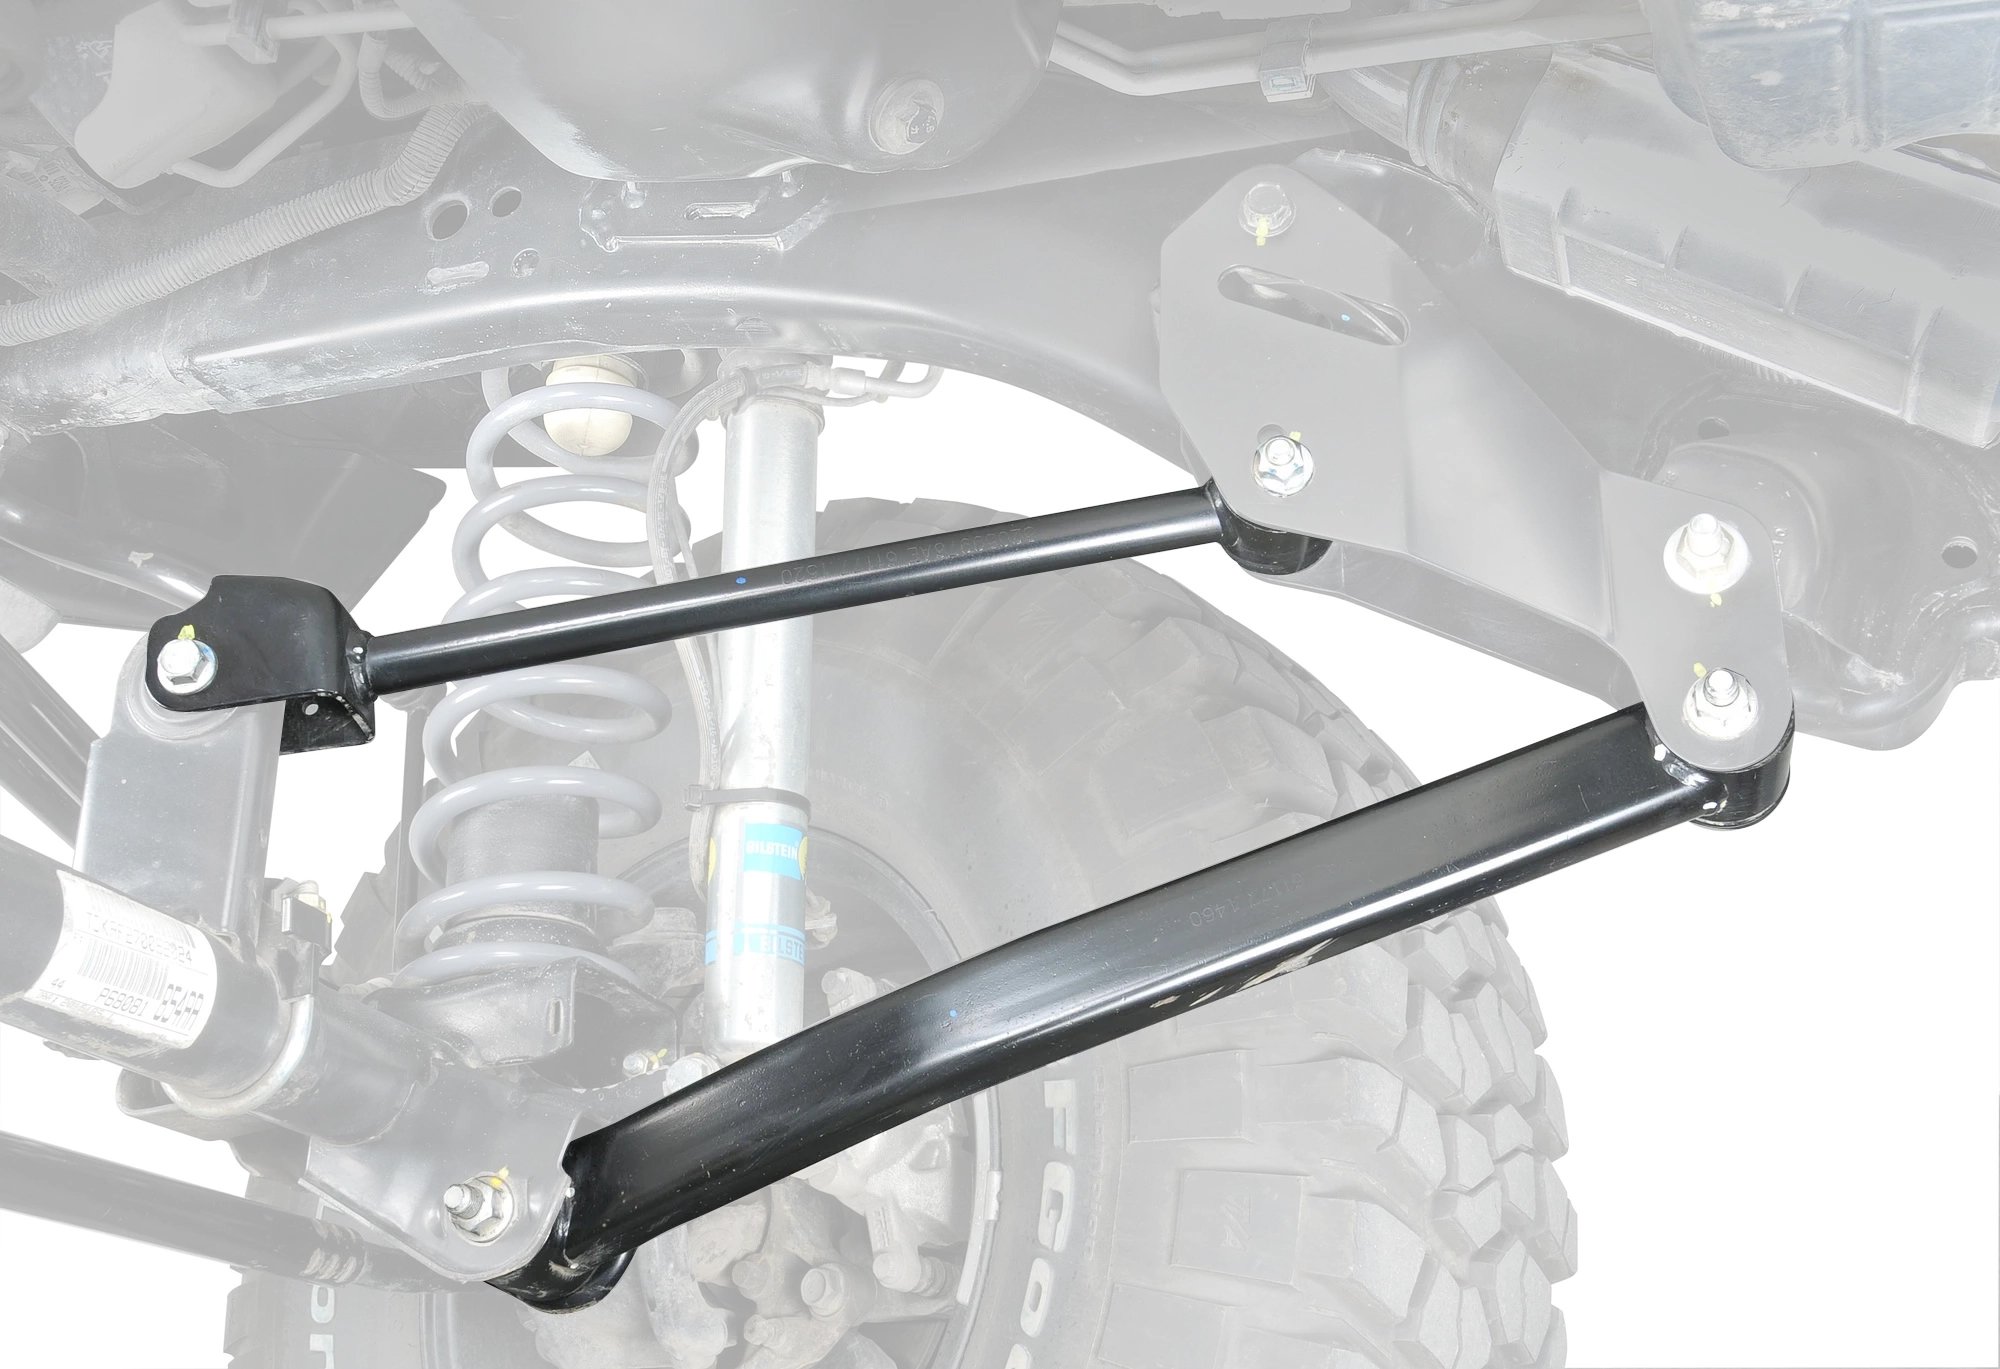 What Are Jeep Control Arms? | Quadratec